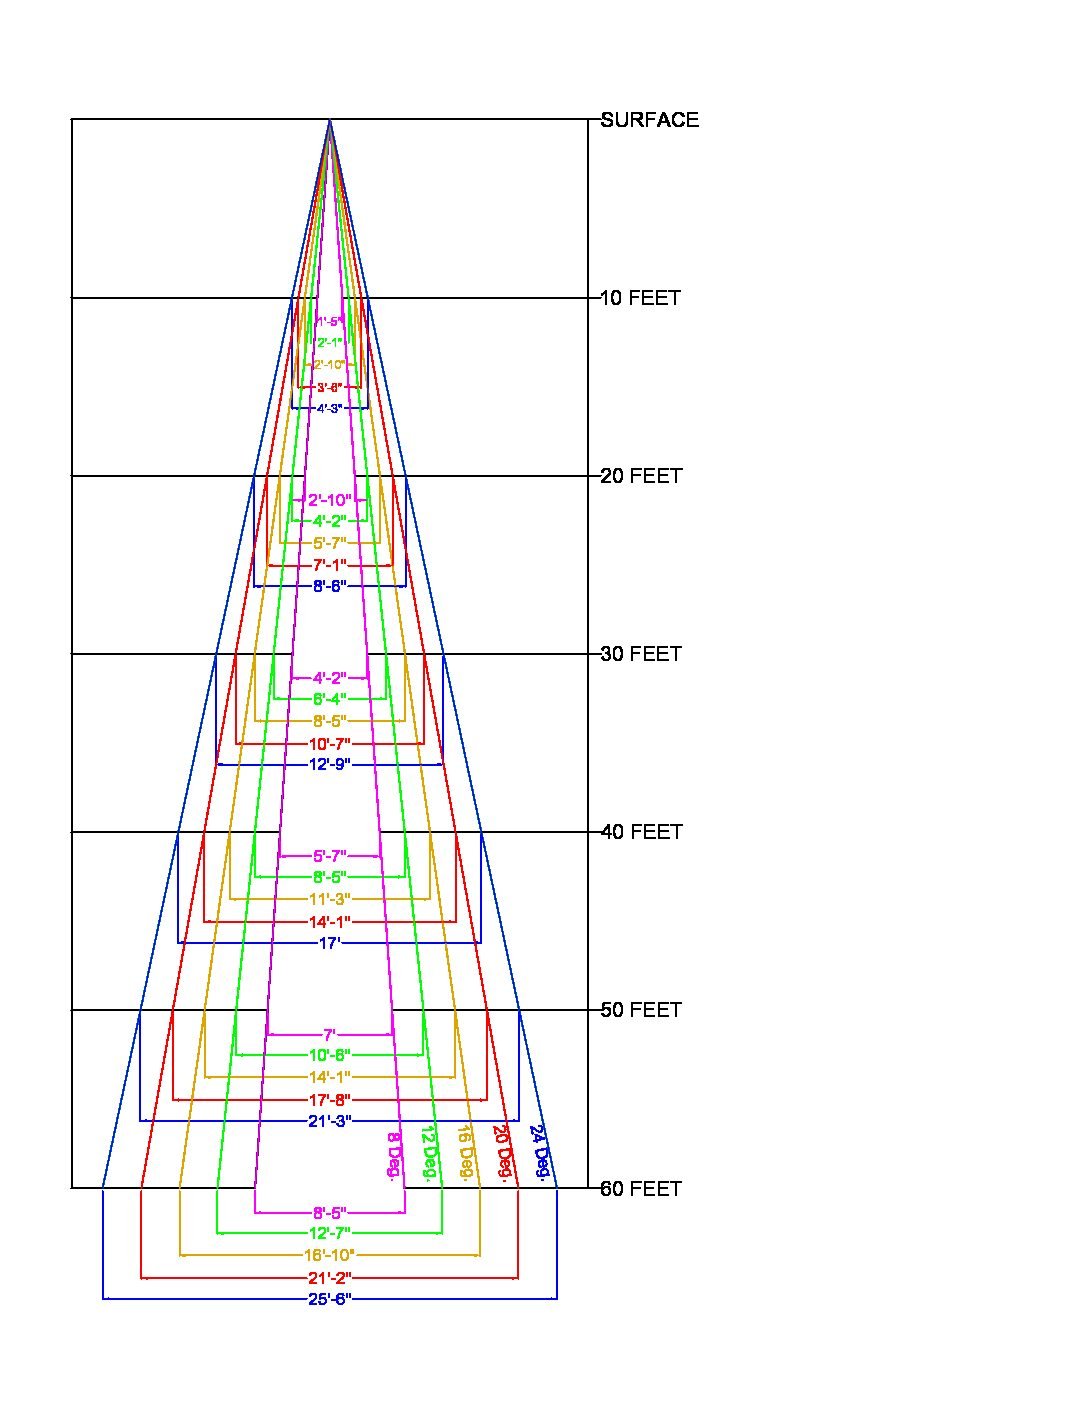 So I Made A Cone Angle Diagram - Ice Fishing Forum - Ice Fishing Forum